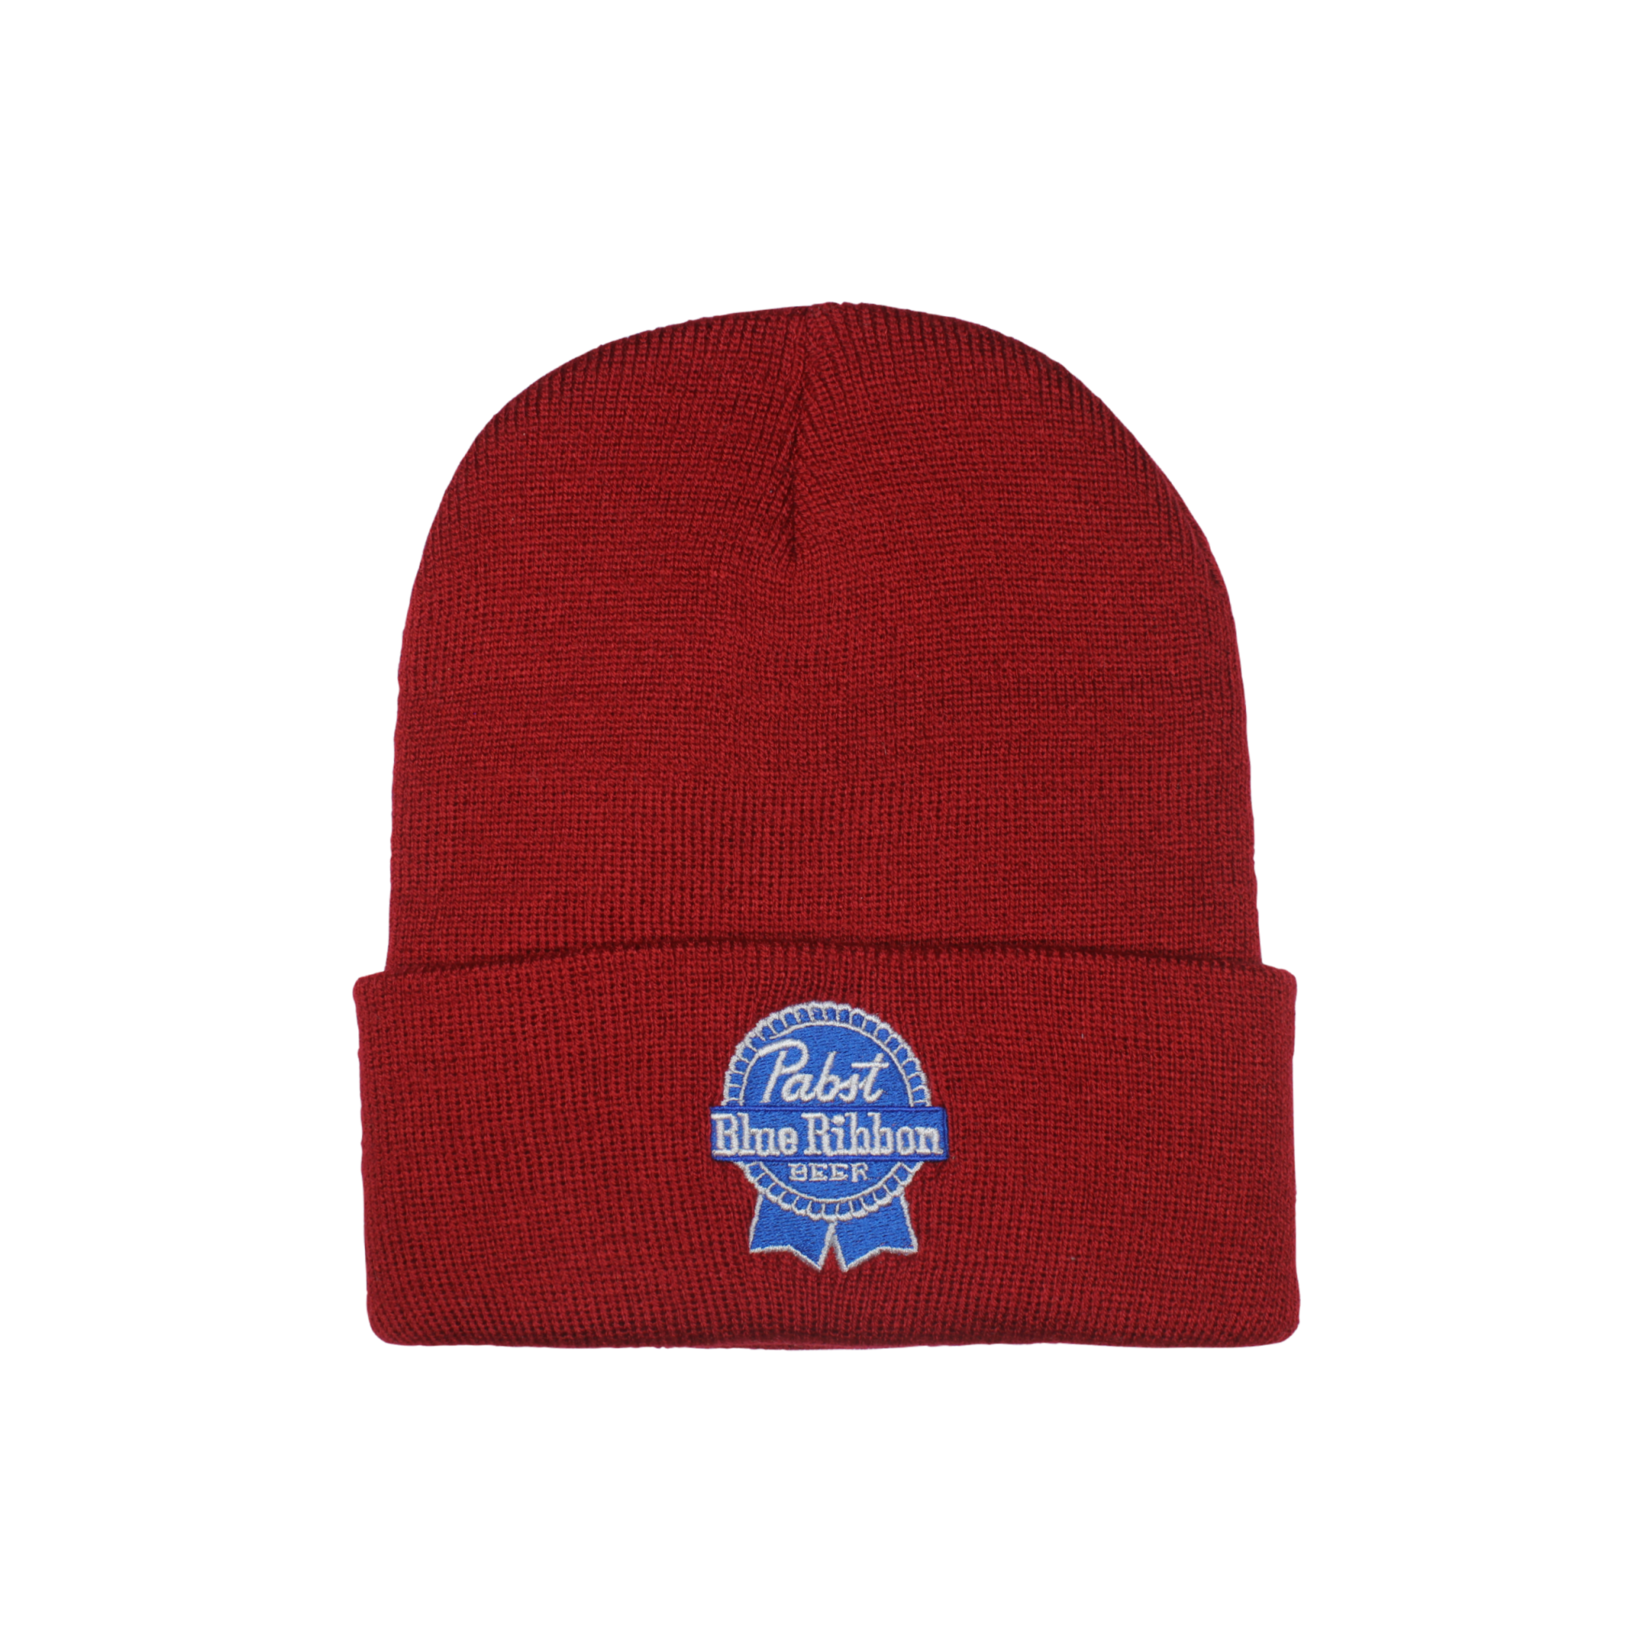 Pabst Pabst Blue Ribbon Cardinal Red Cuffed Beanie